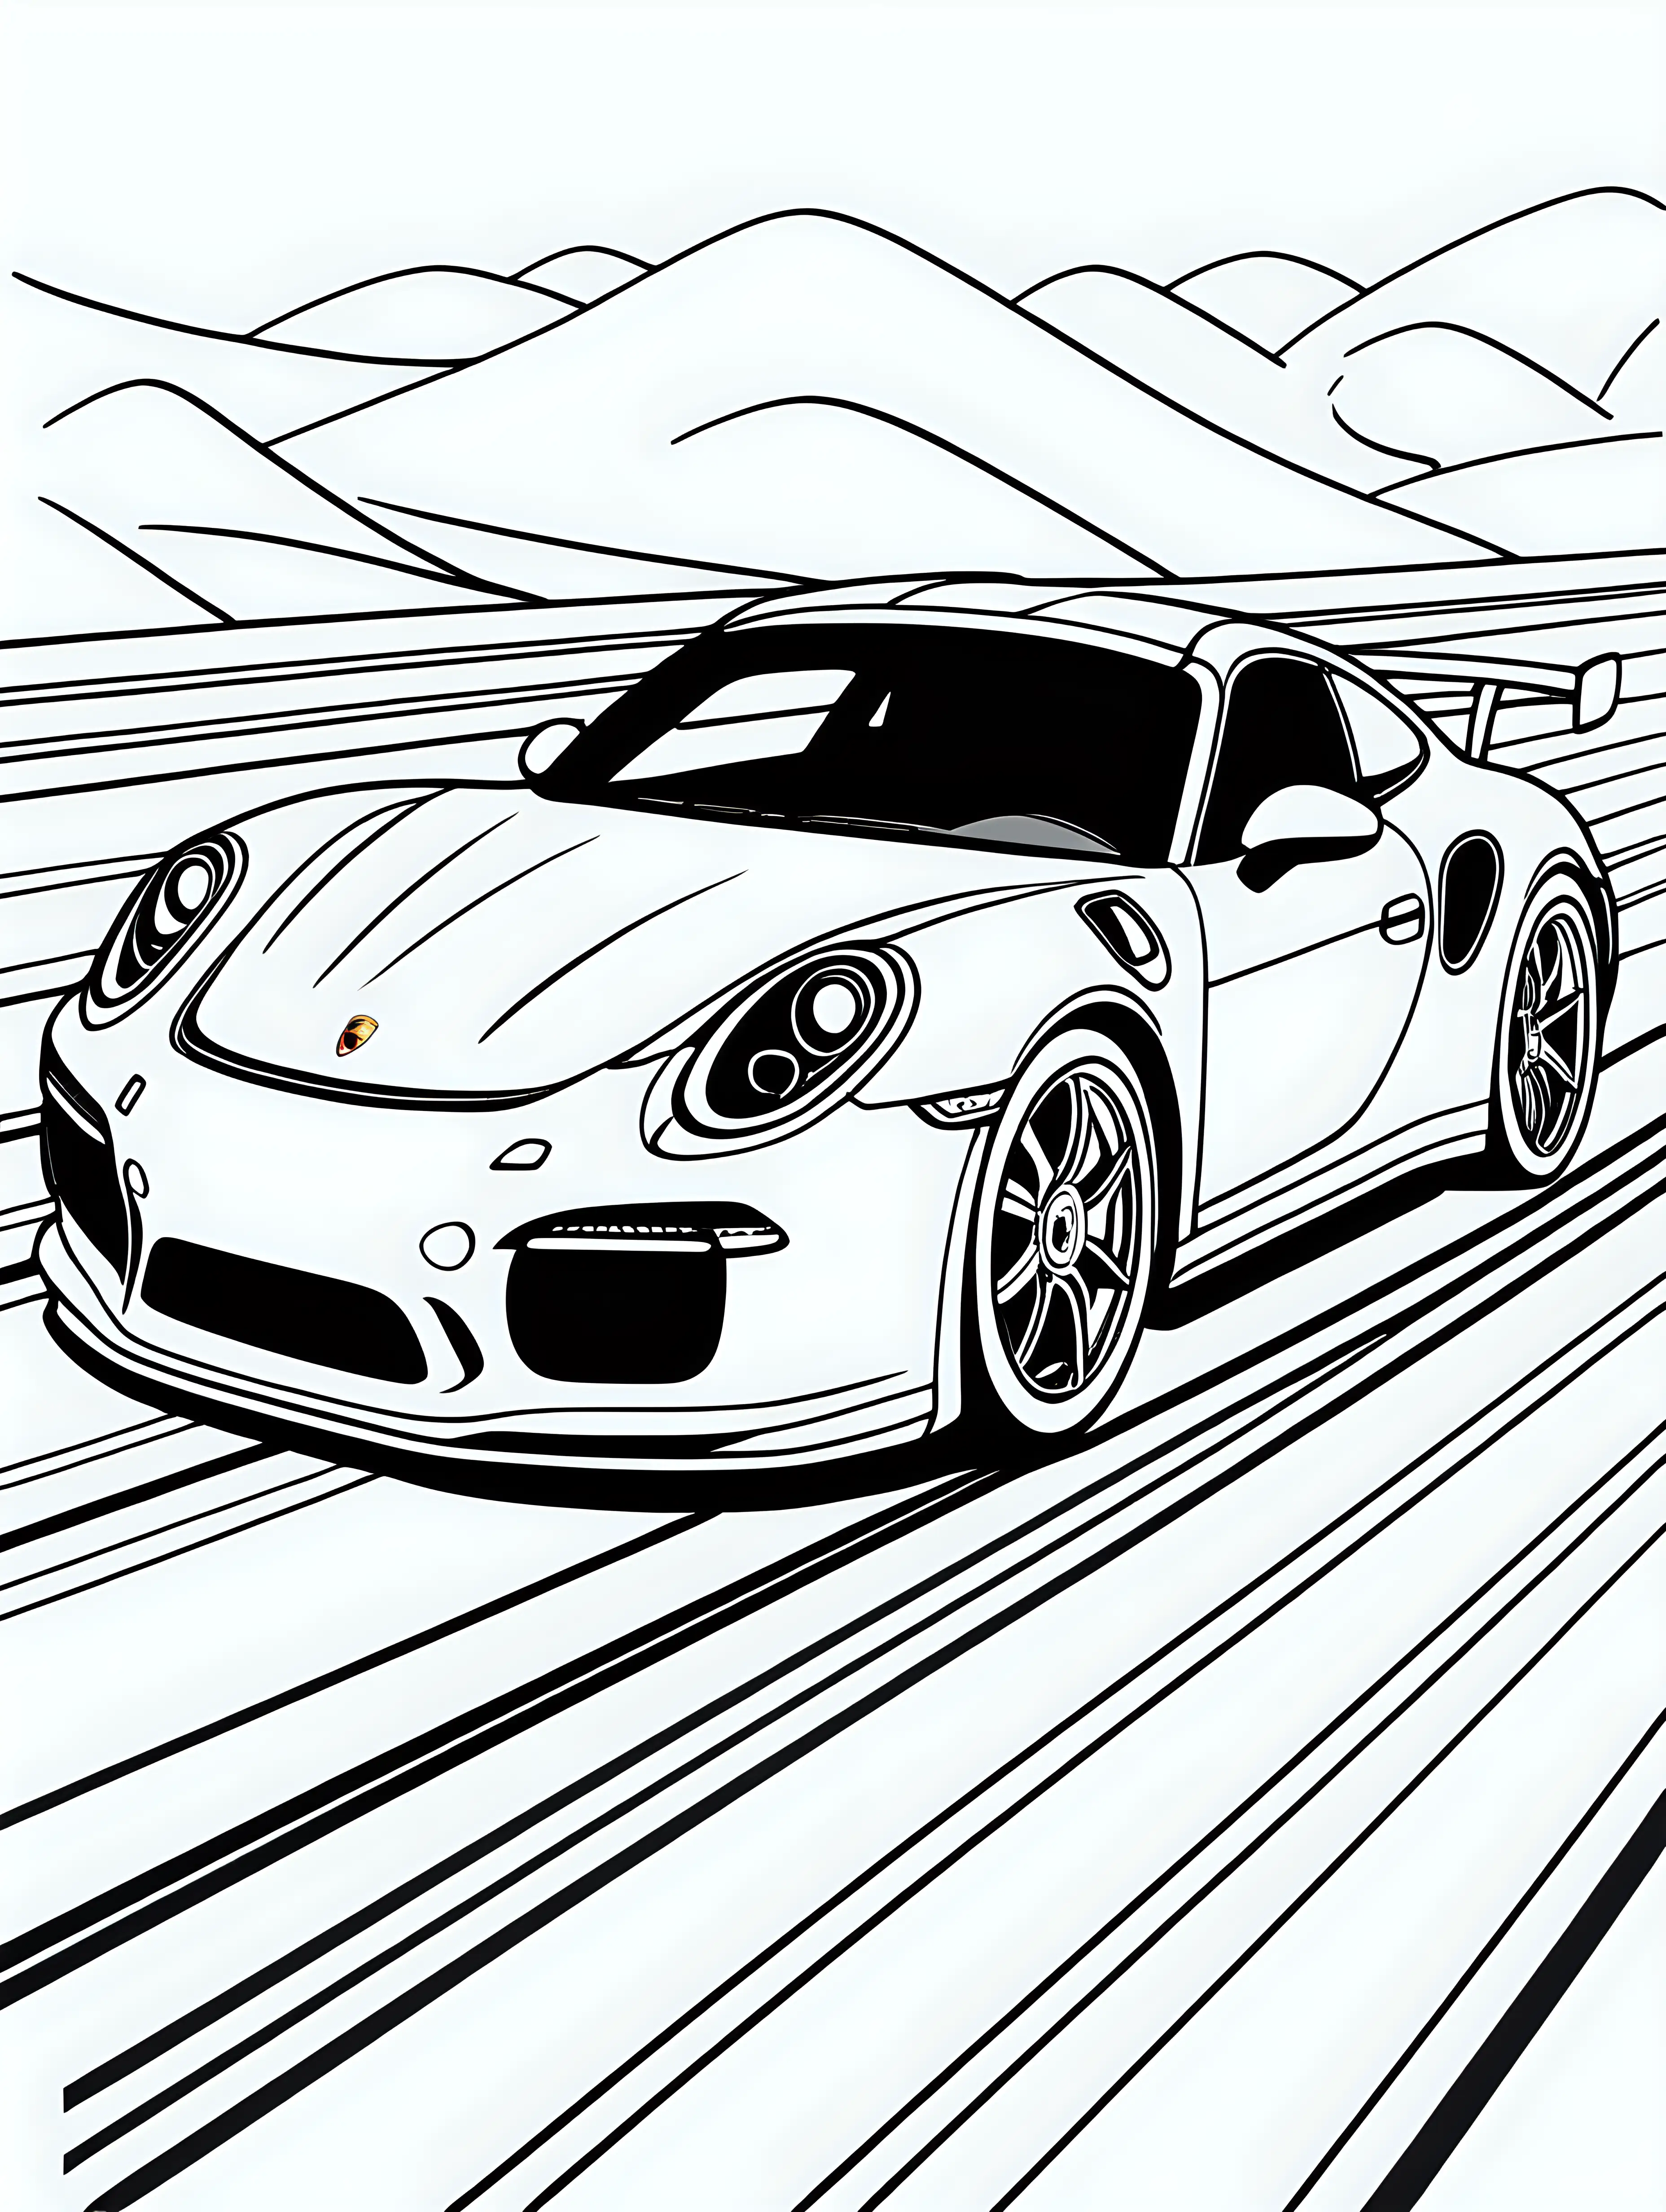 Porsche Car Coloring Page on Track for Kids